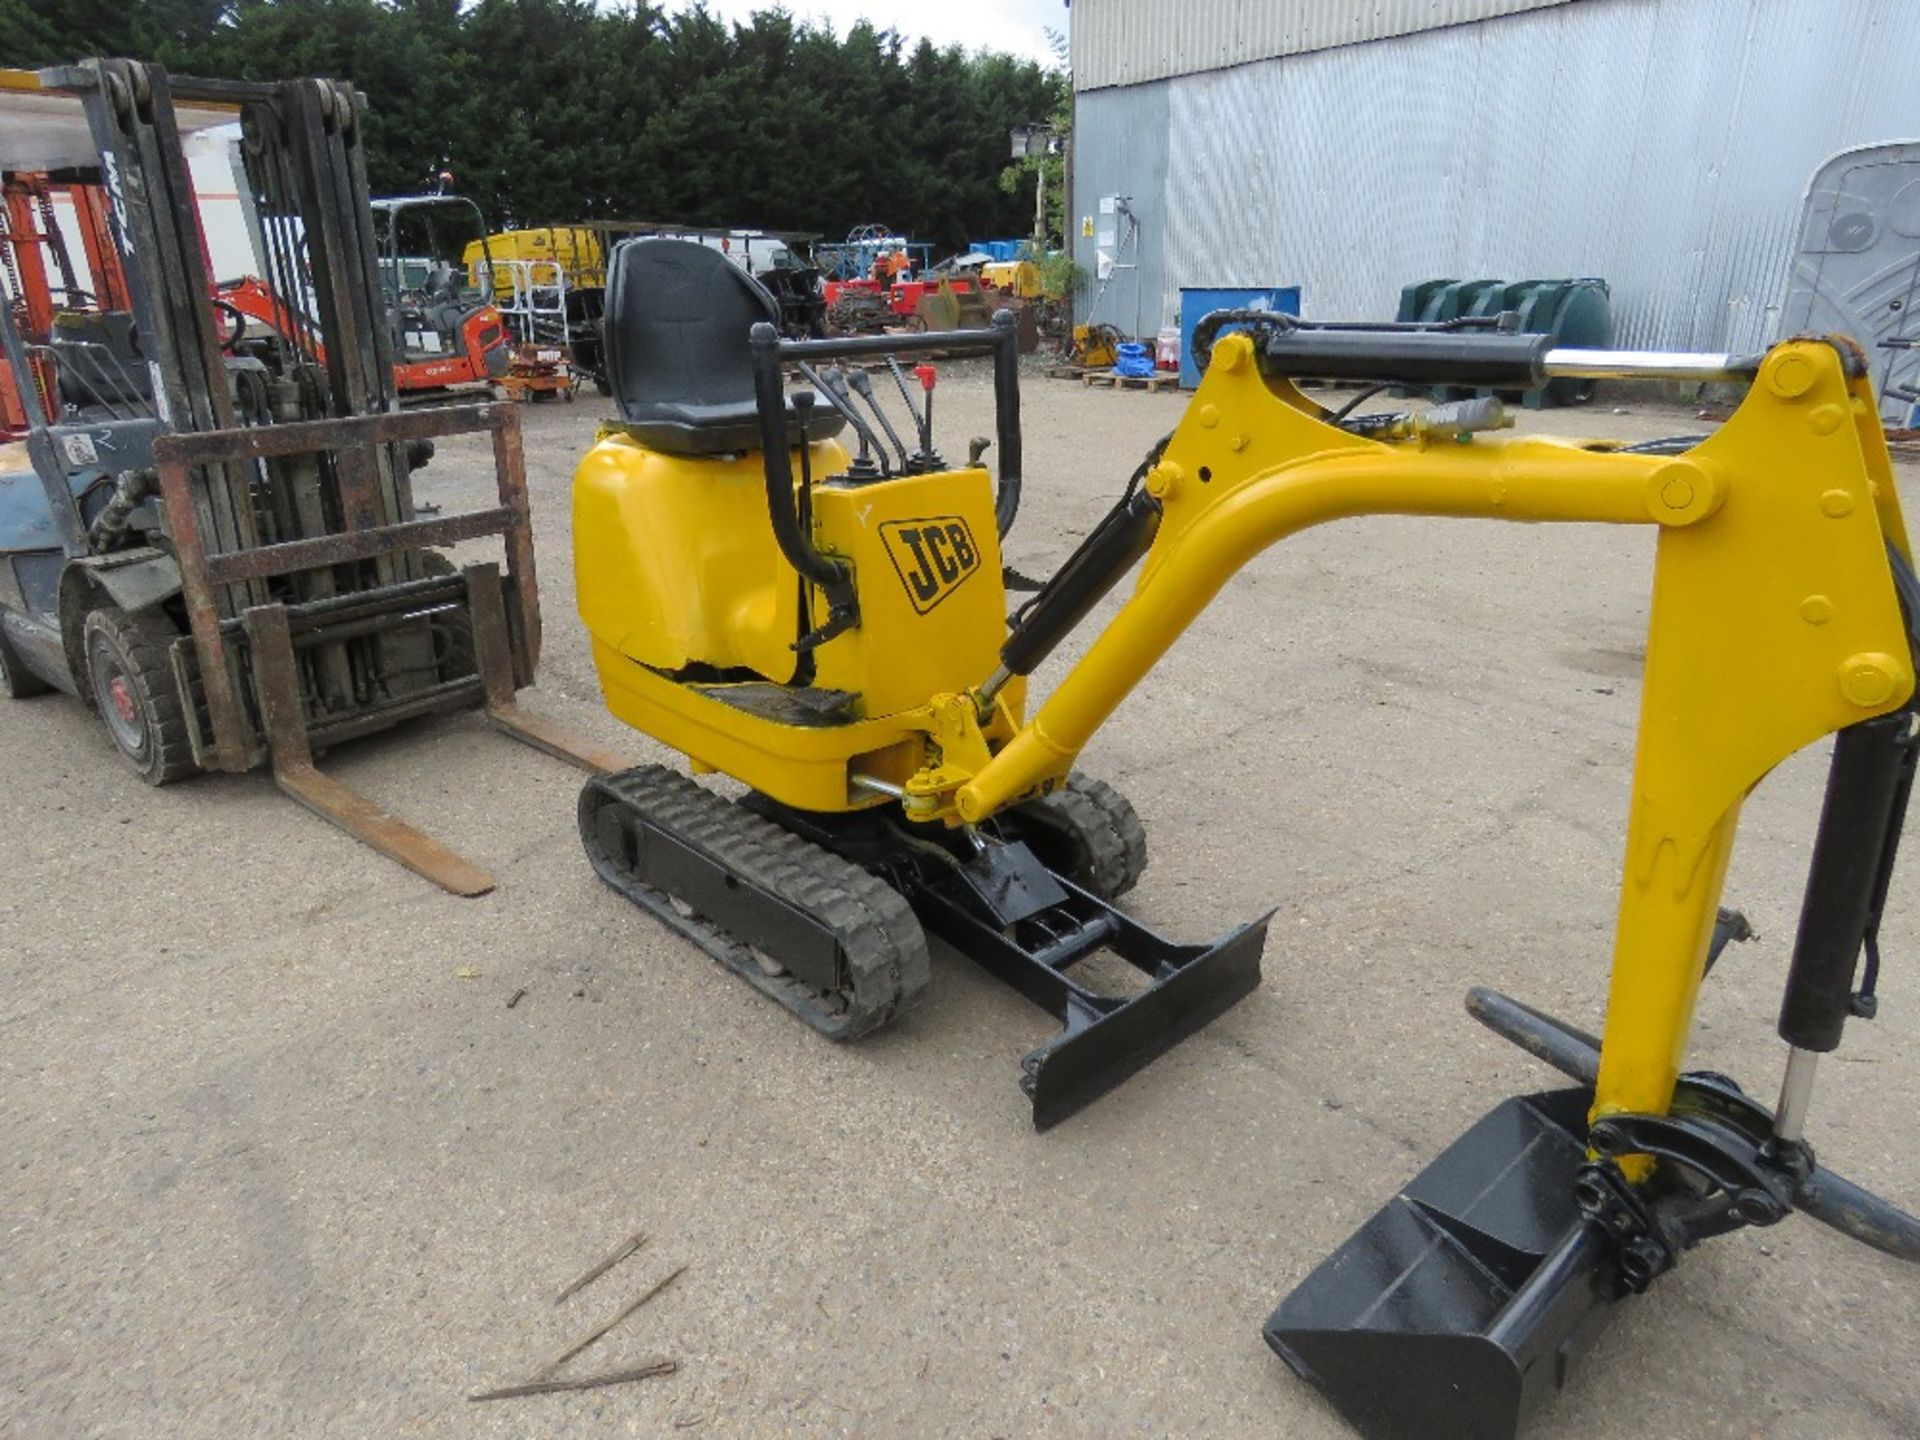 JCB 8008CTS MICRO EXCAVATOR C/W 1 GRADING BUCKET, YEAR 2015, SN: JCB8008A00764702, RECORDED HOURS: